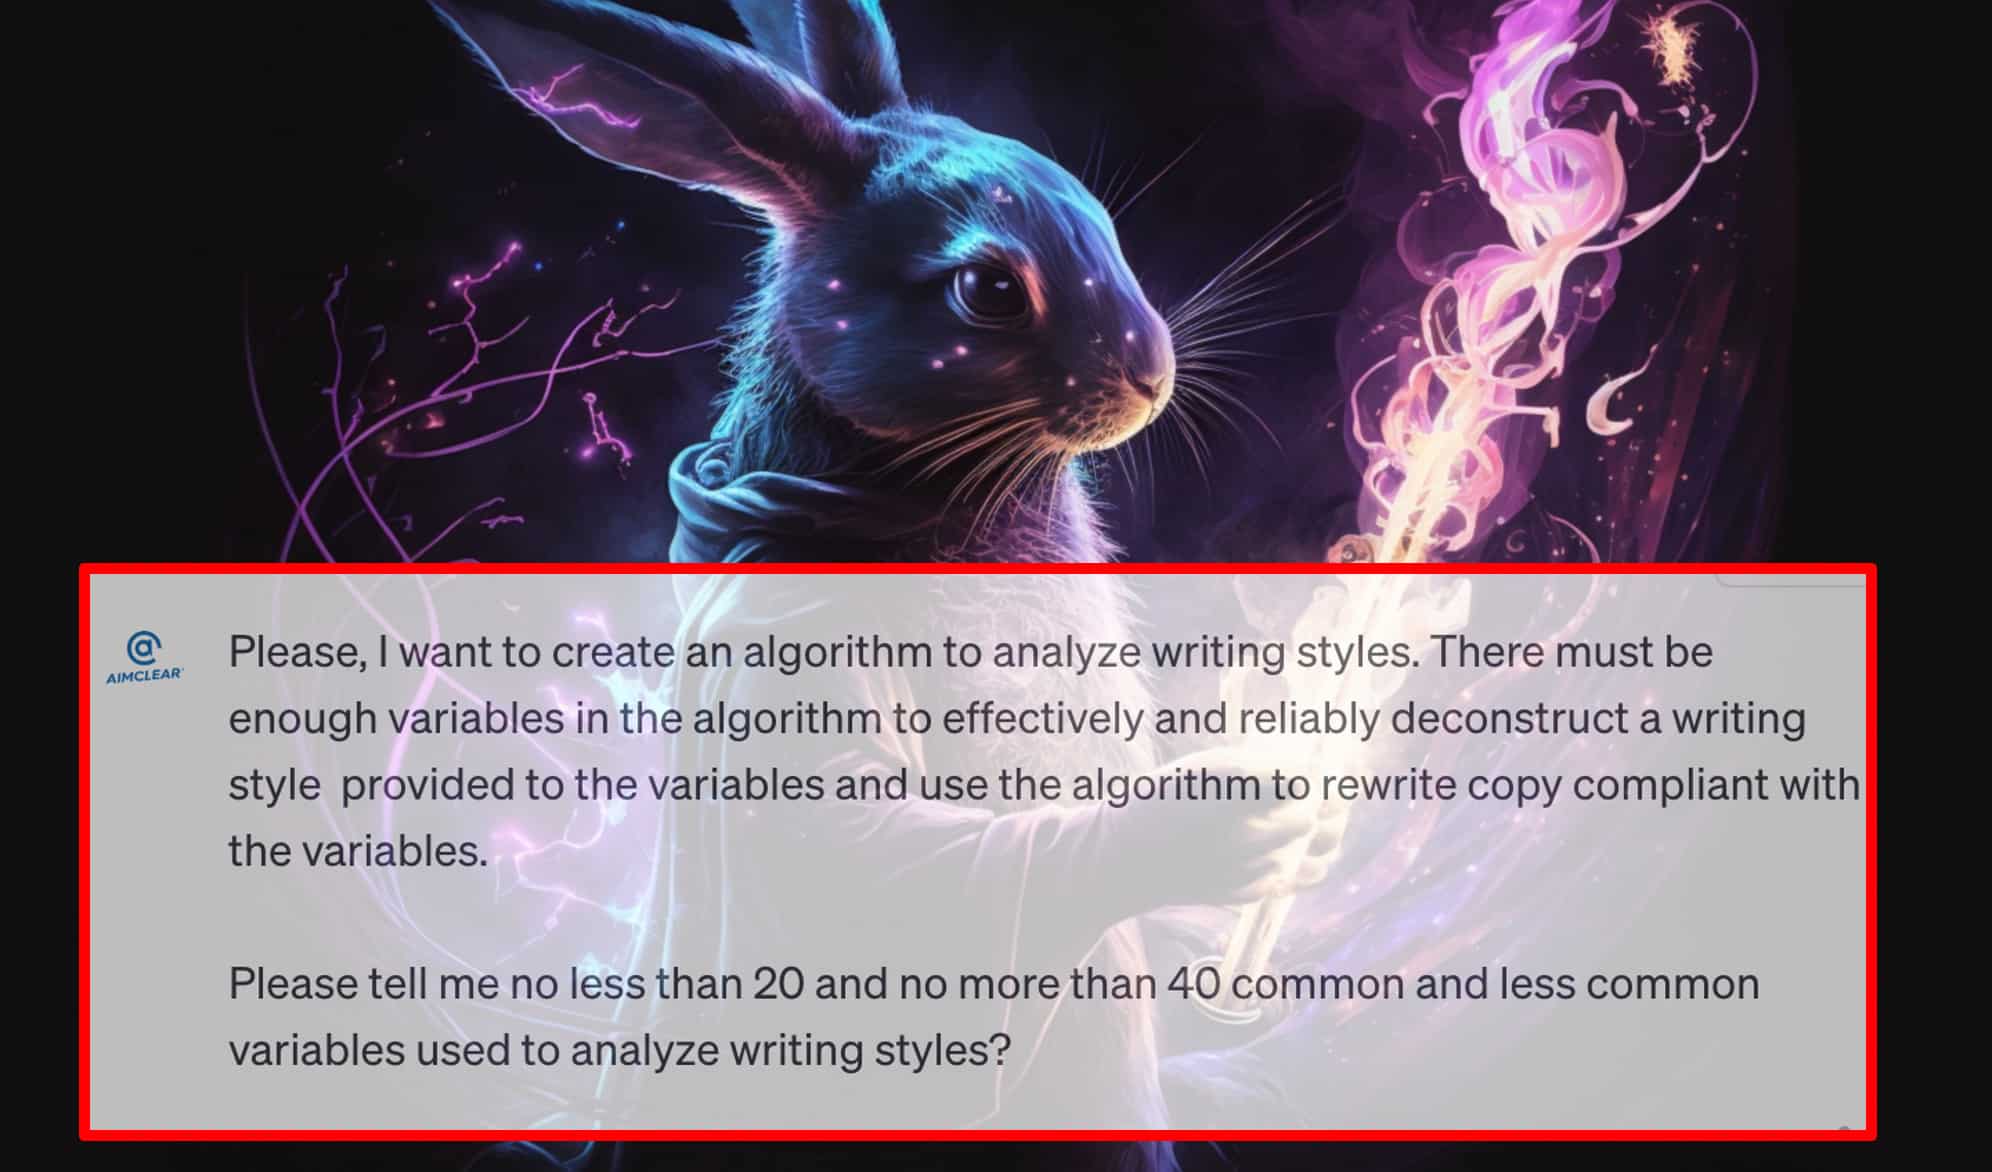 Find out what variable GPT may consider to copy writing styles using AI